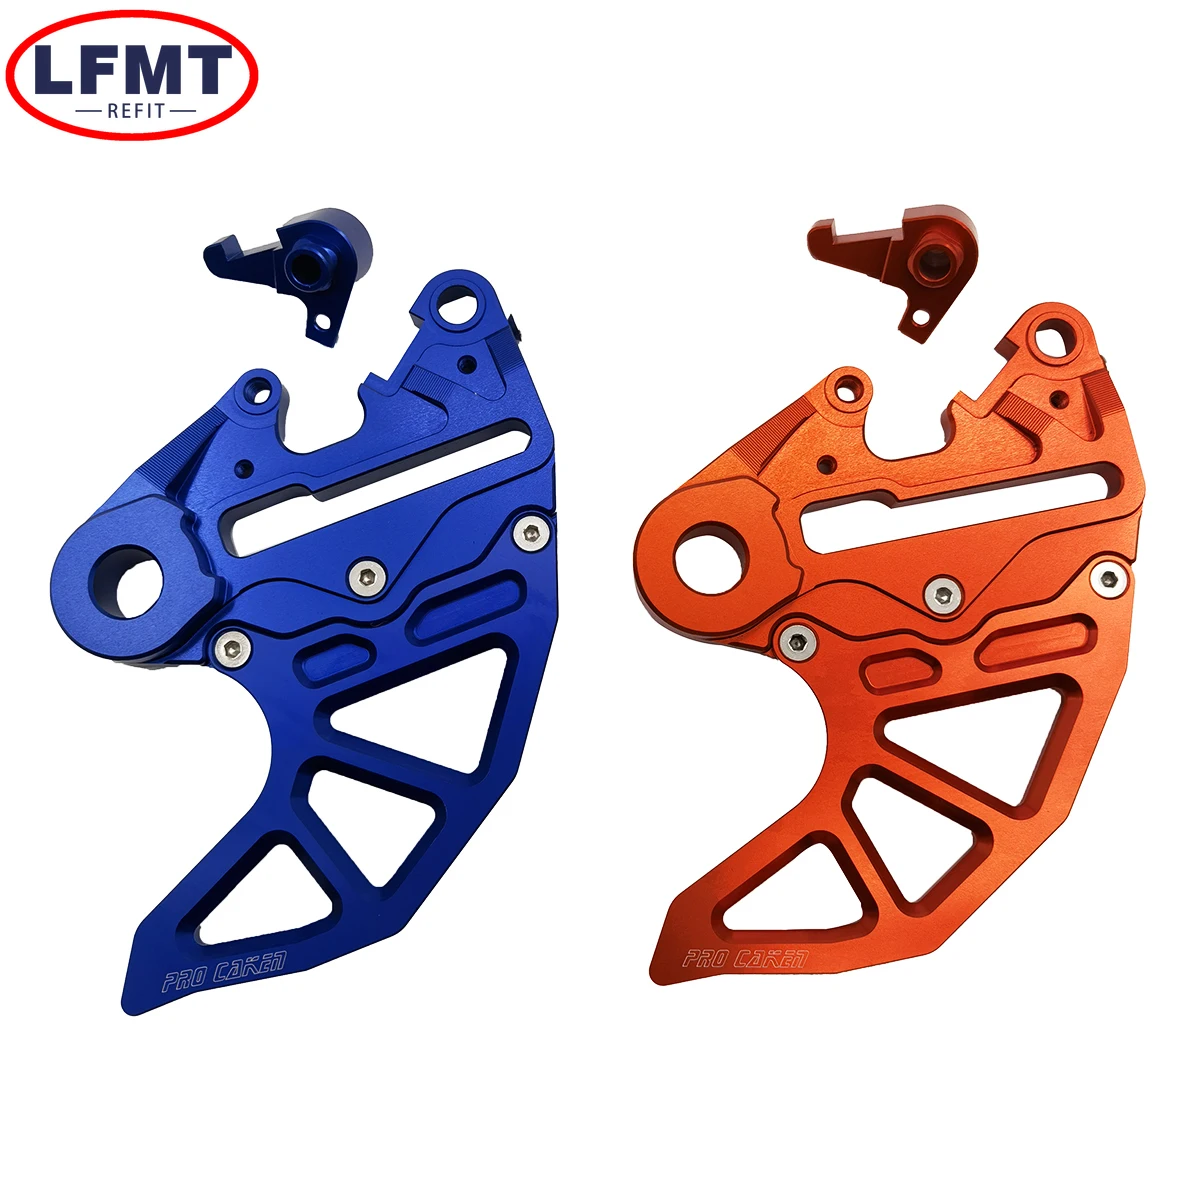 

For KTM SX SXF SMR XC XCF XCW EXC EXCF 6 Days TPI For Husqvarna TE FE FC TC Motocross 20mm Axle Rear Brake Disc Guard Protector